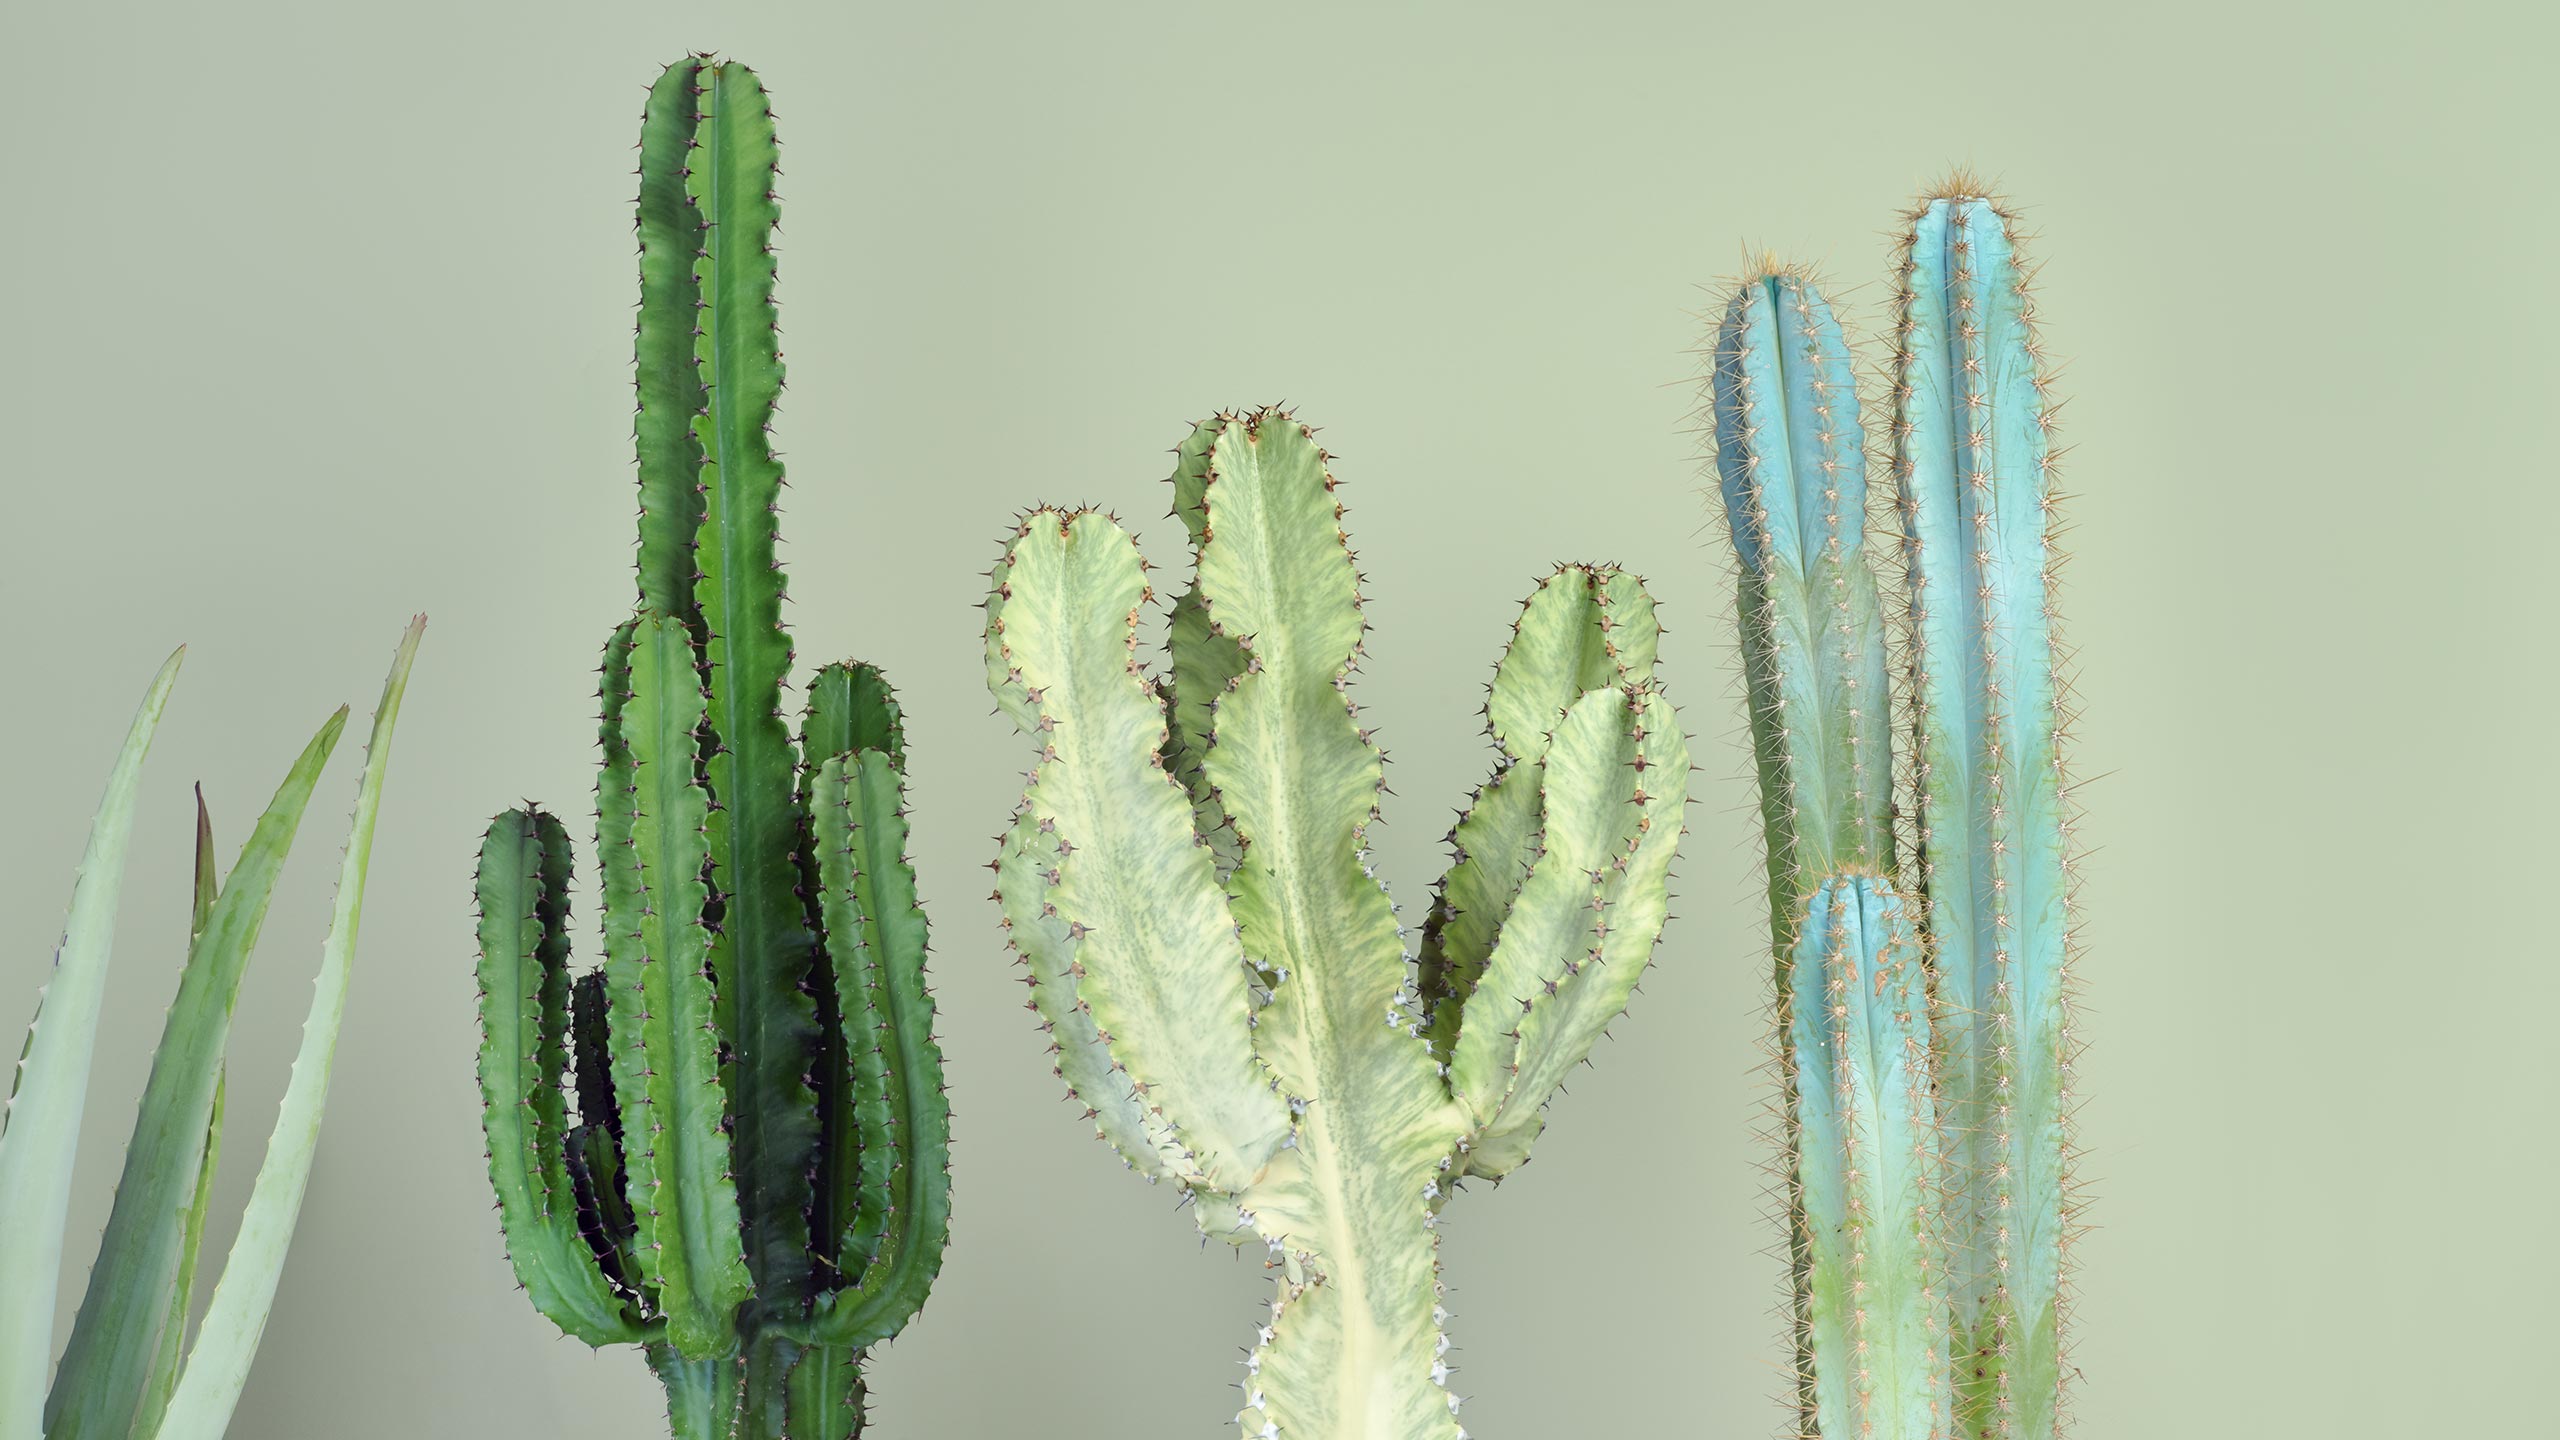 Four different species of cactus in various shades of green against a sage-coloured backdrop. 